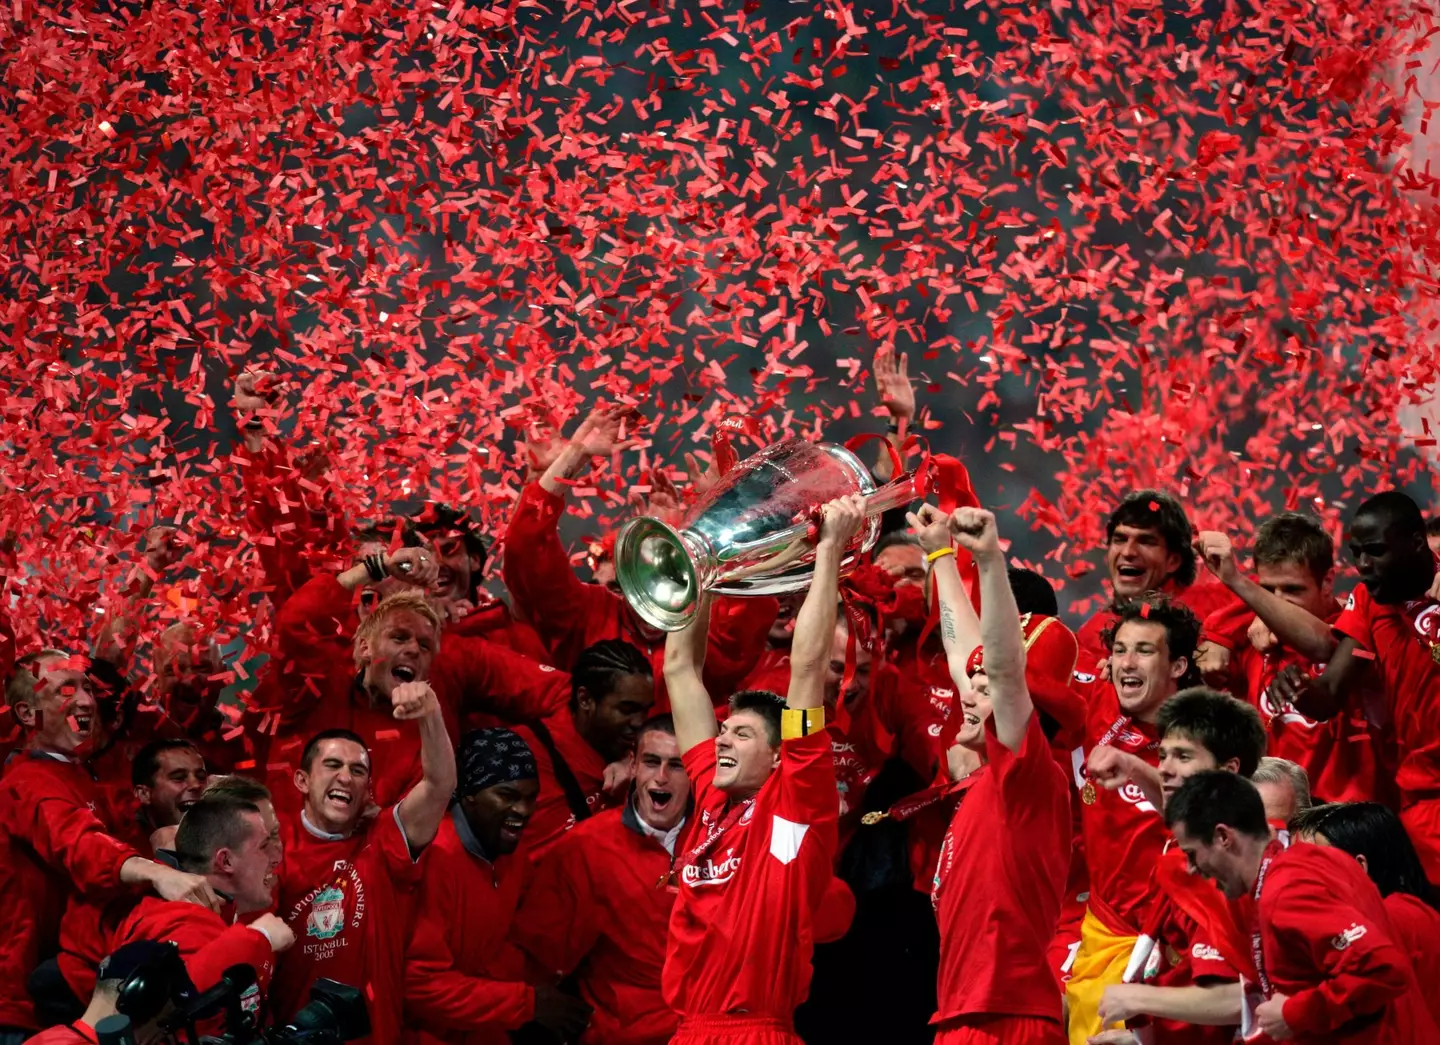 Liverpool were crowned European champions in 2005. Image: PA Images